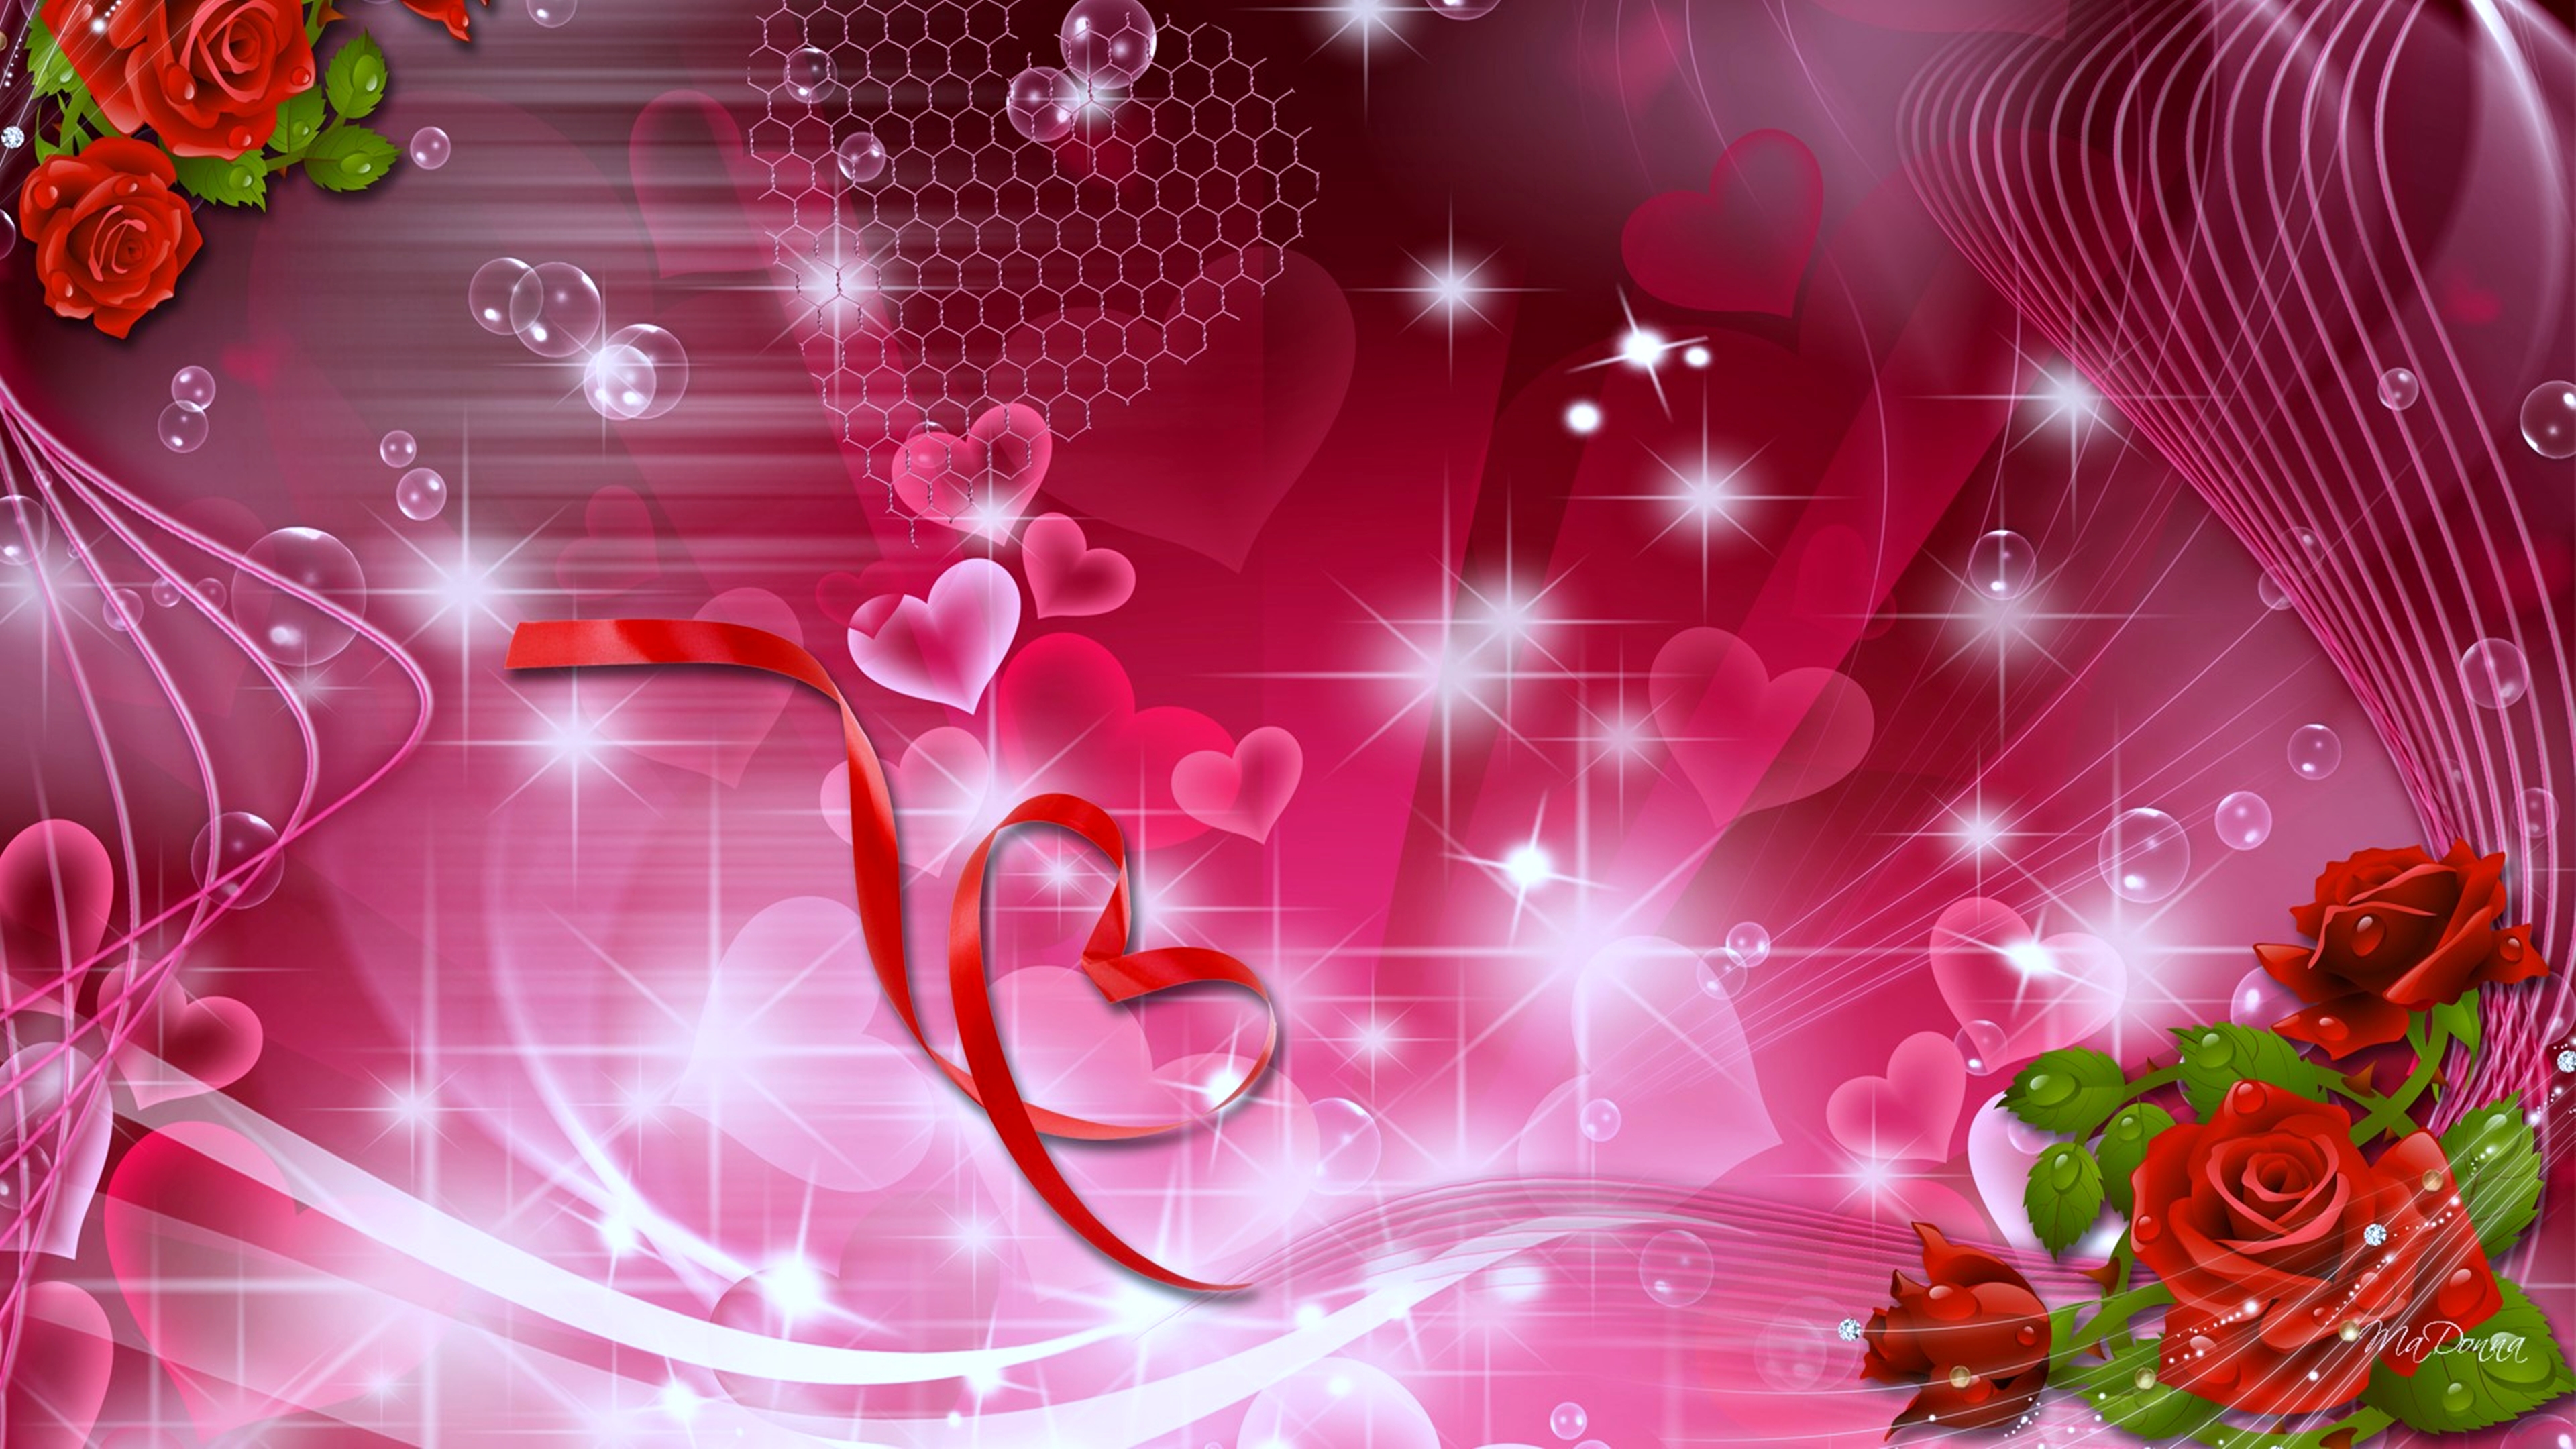 android love, heart, rose, artistic, romantic